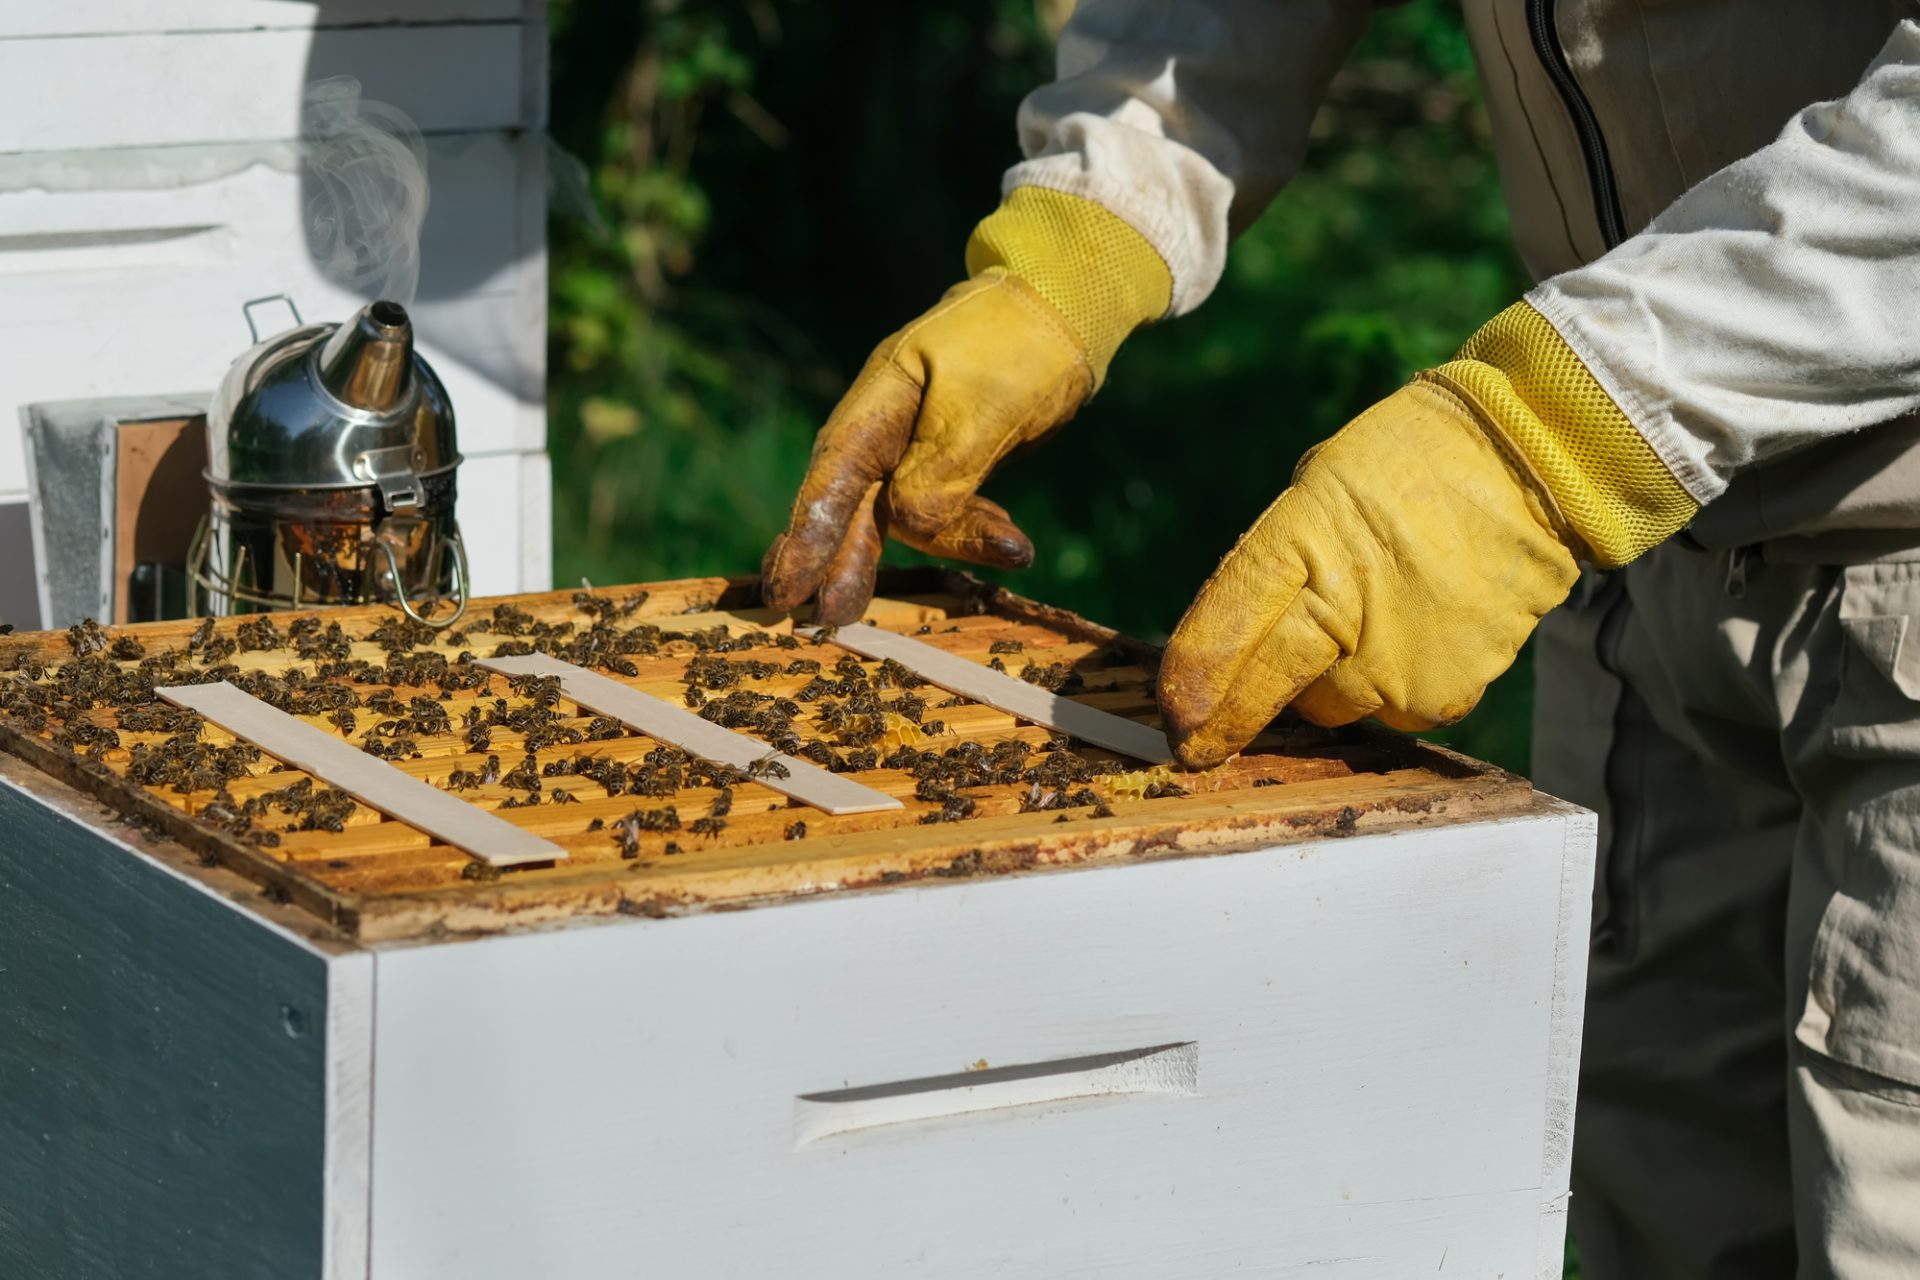 Beekeeper treating bees for Varroa mites